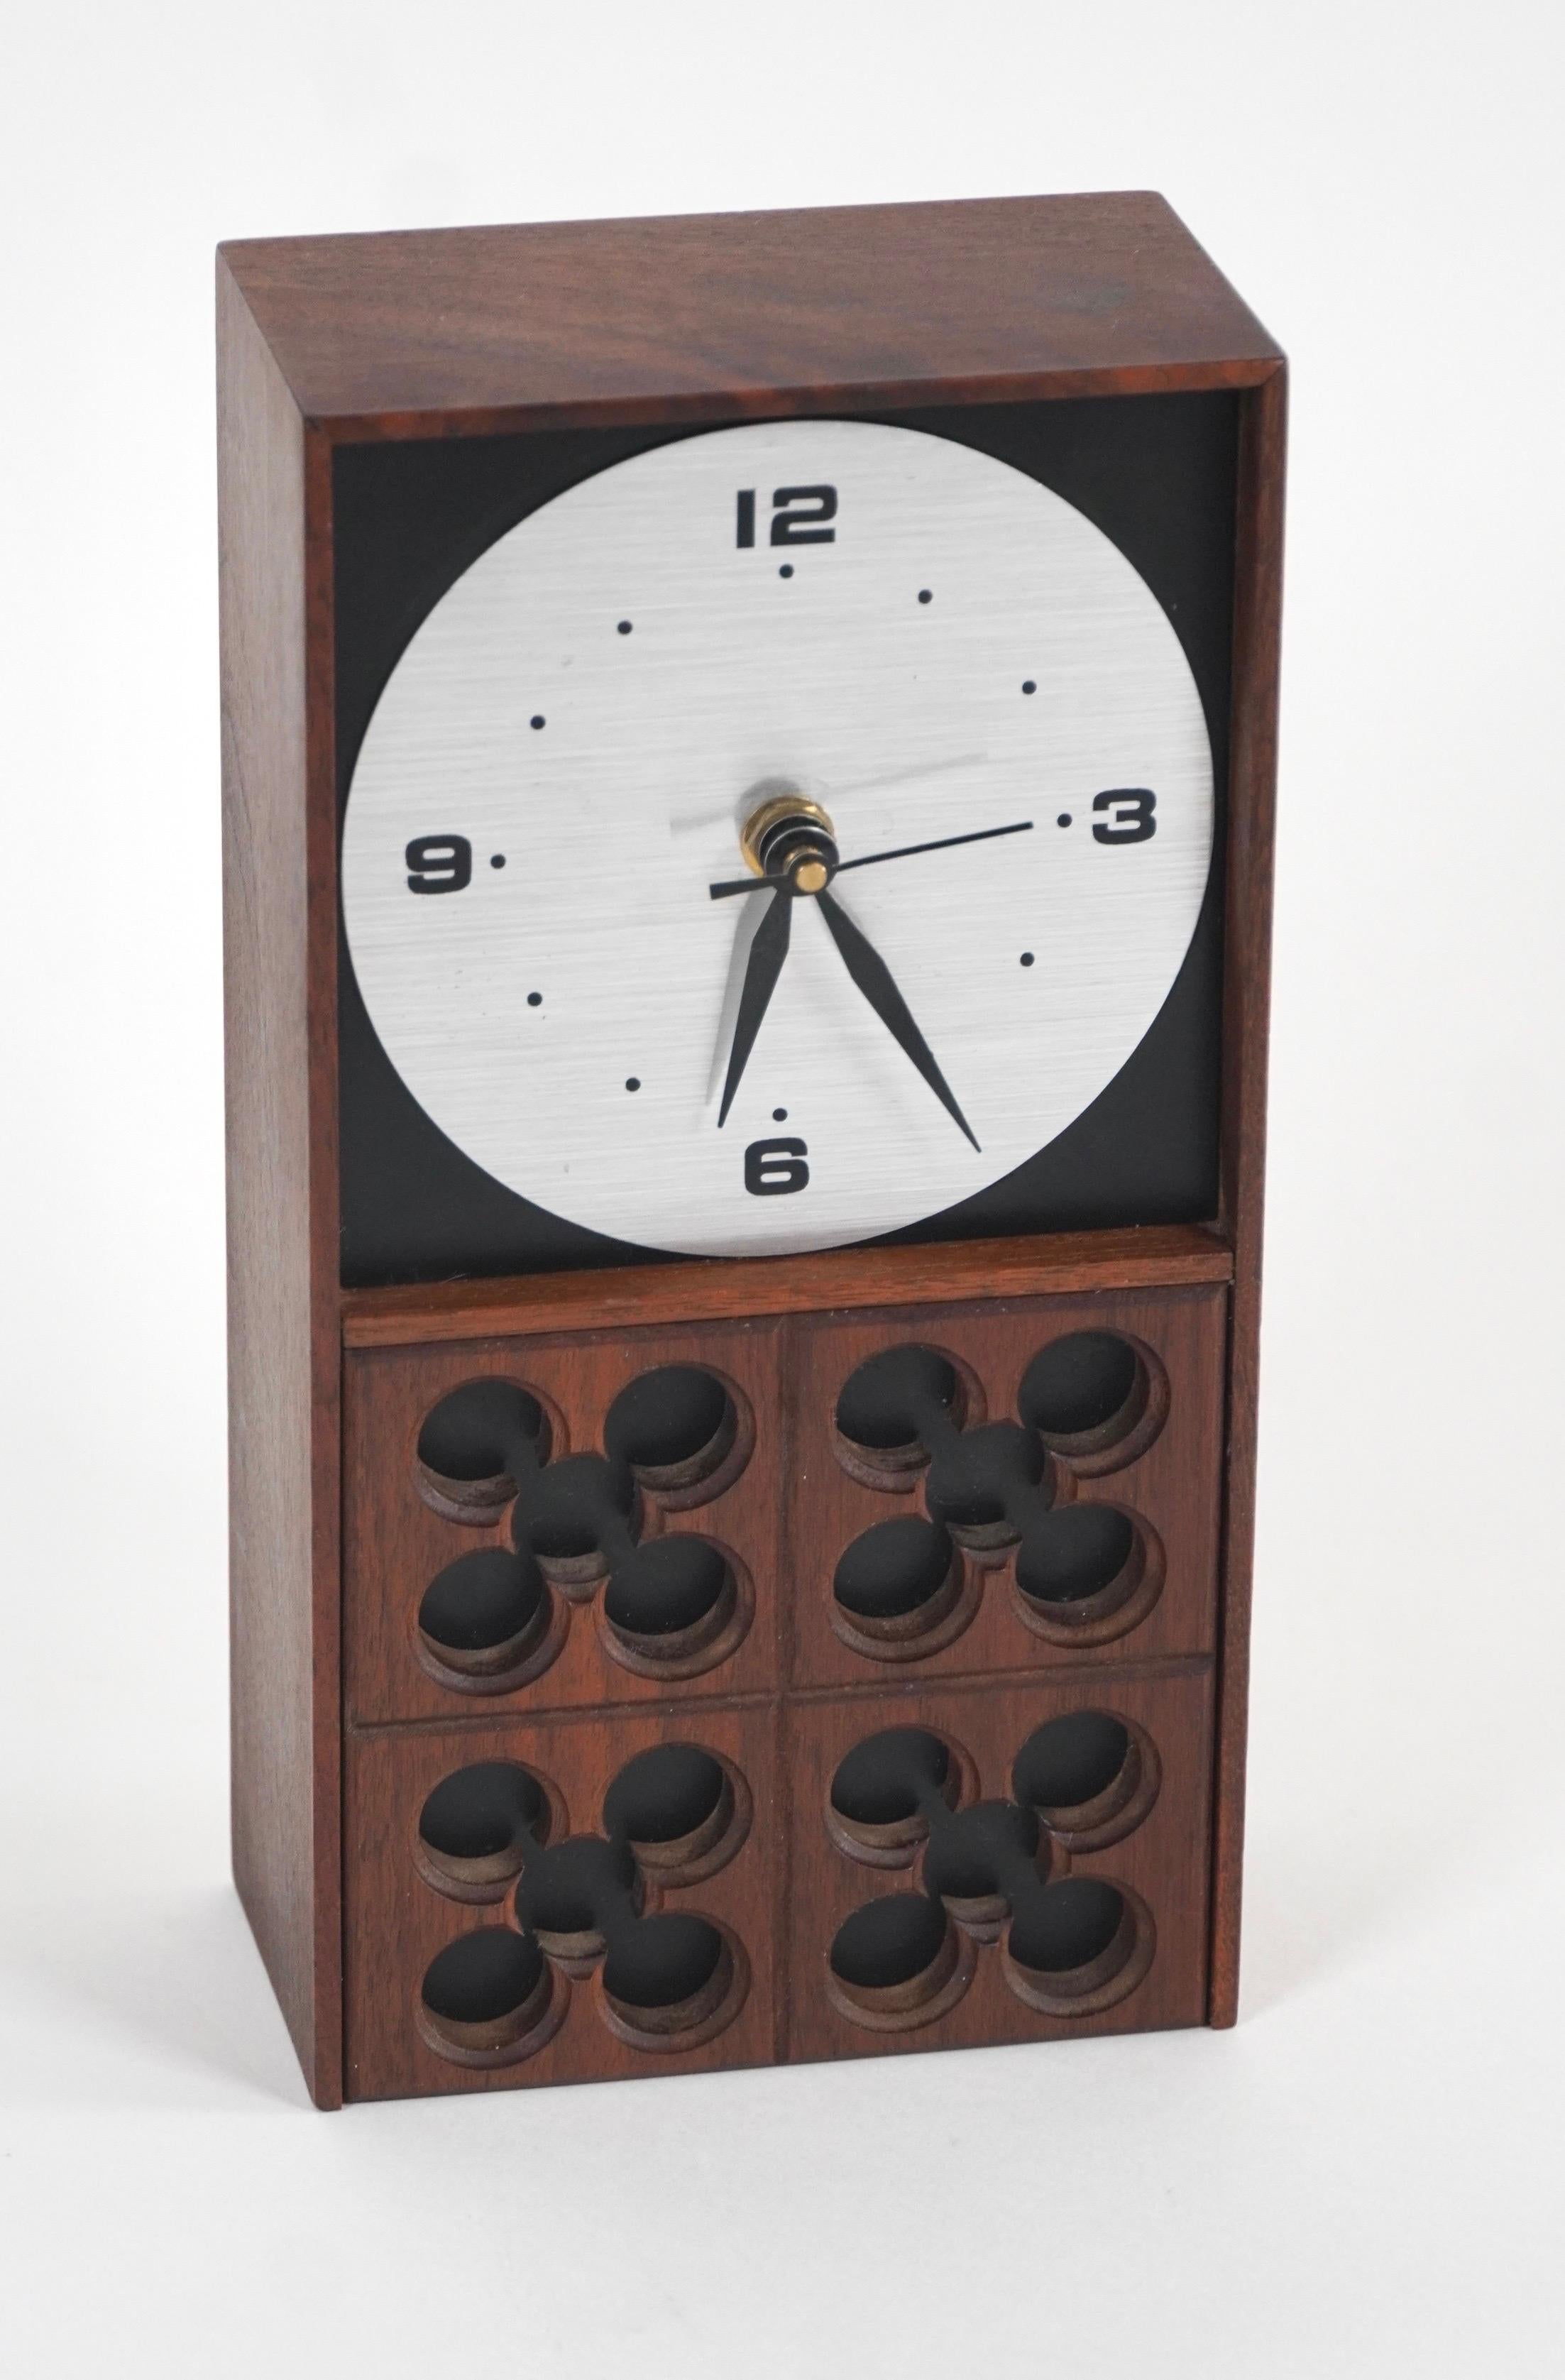 Desk clock by American industrial designer Arthur Umanoff (1923-1985) stylized walnut case with a aluminum face and black painted hands and numerals, this clock has hour, minute and second hands, it keeps accurate time with an battery operated